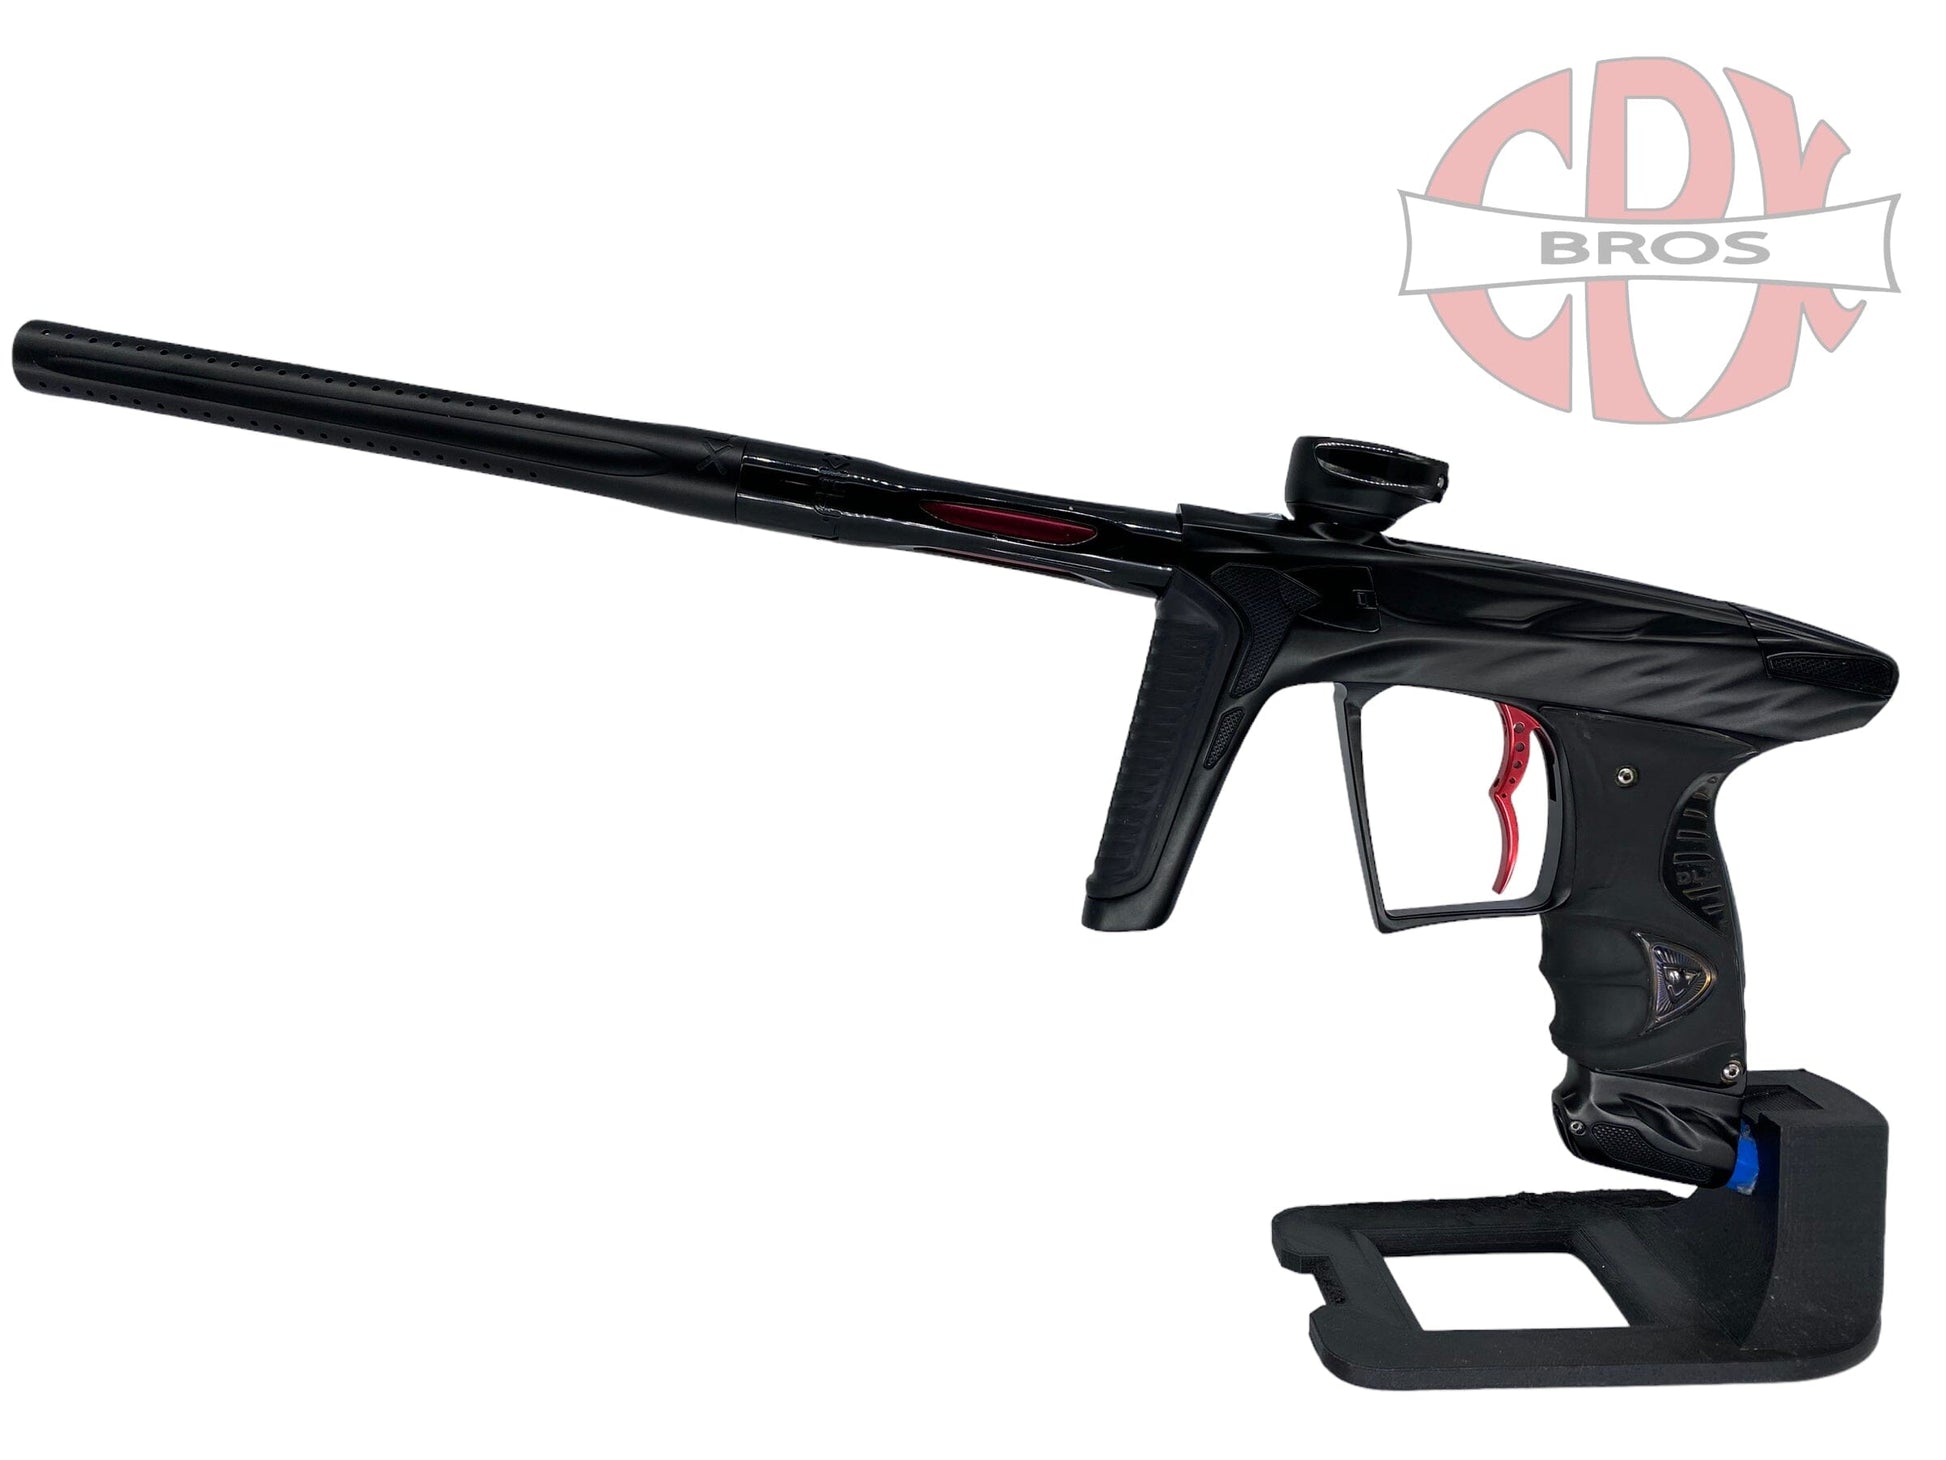 Used Hk Army Luxe A51 Paintball Gun from CPXBrosPaintball Buy/Sell/Trade Paintball Markers, Paintball Hoppers, Paintball Masks, and Hormesis Headbands